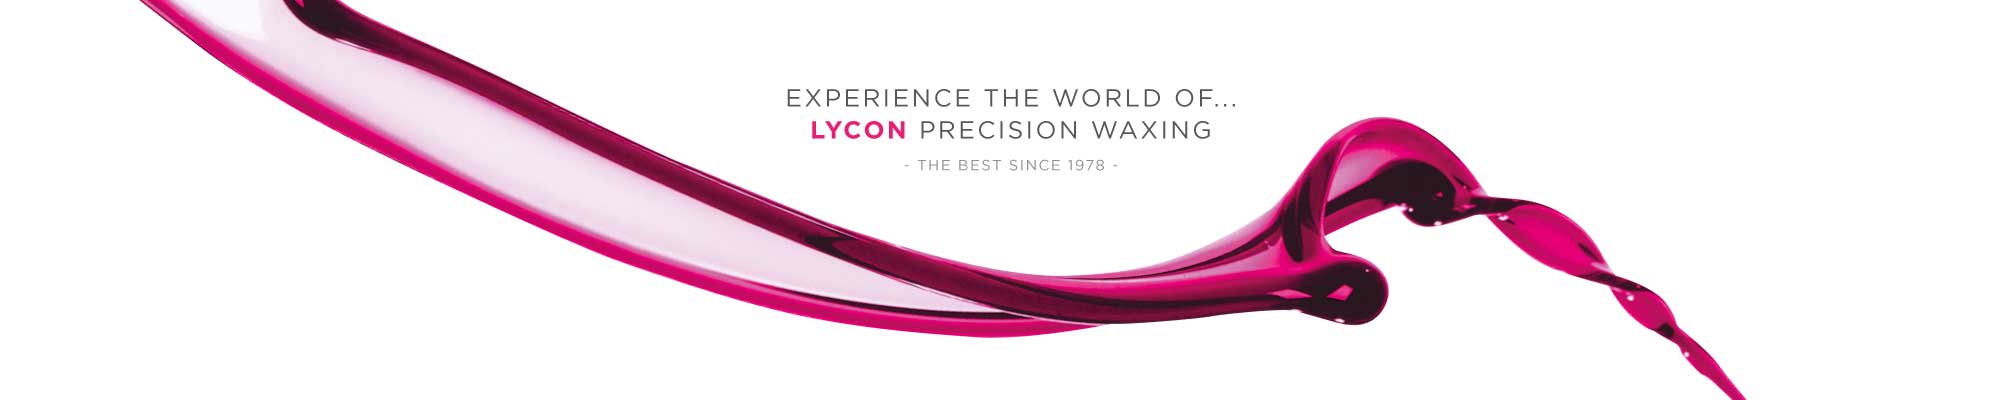 Experience the world of Lycon precision waxing